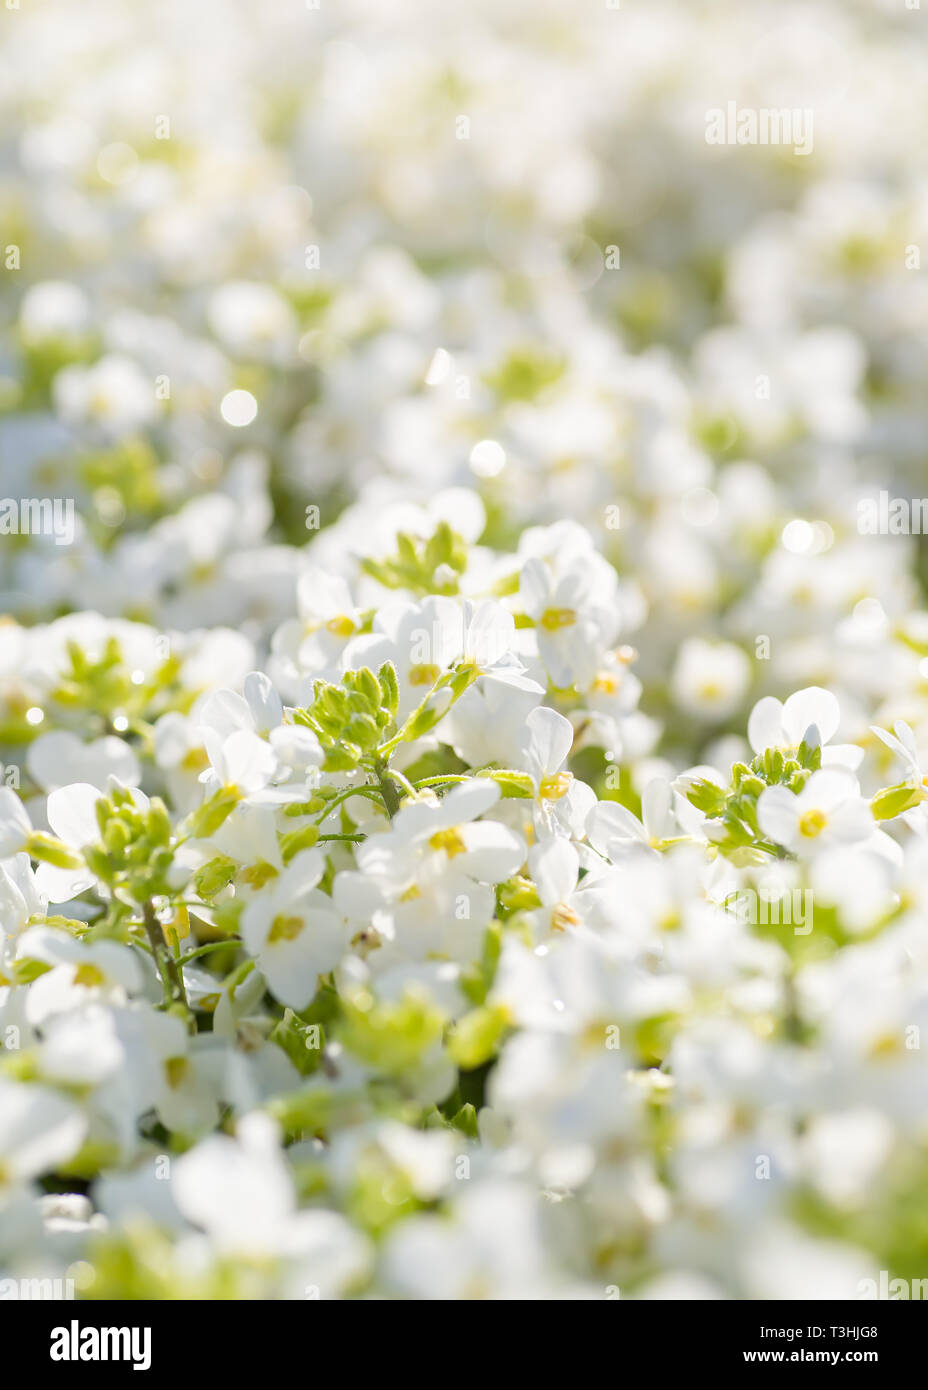 Flowering arabis in the summer garden with shallow depth of field effect. Stock Photo